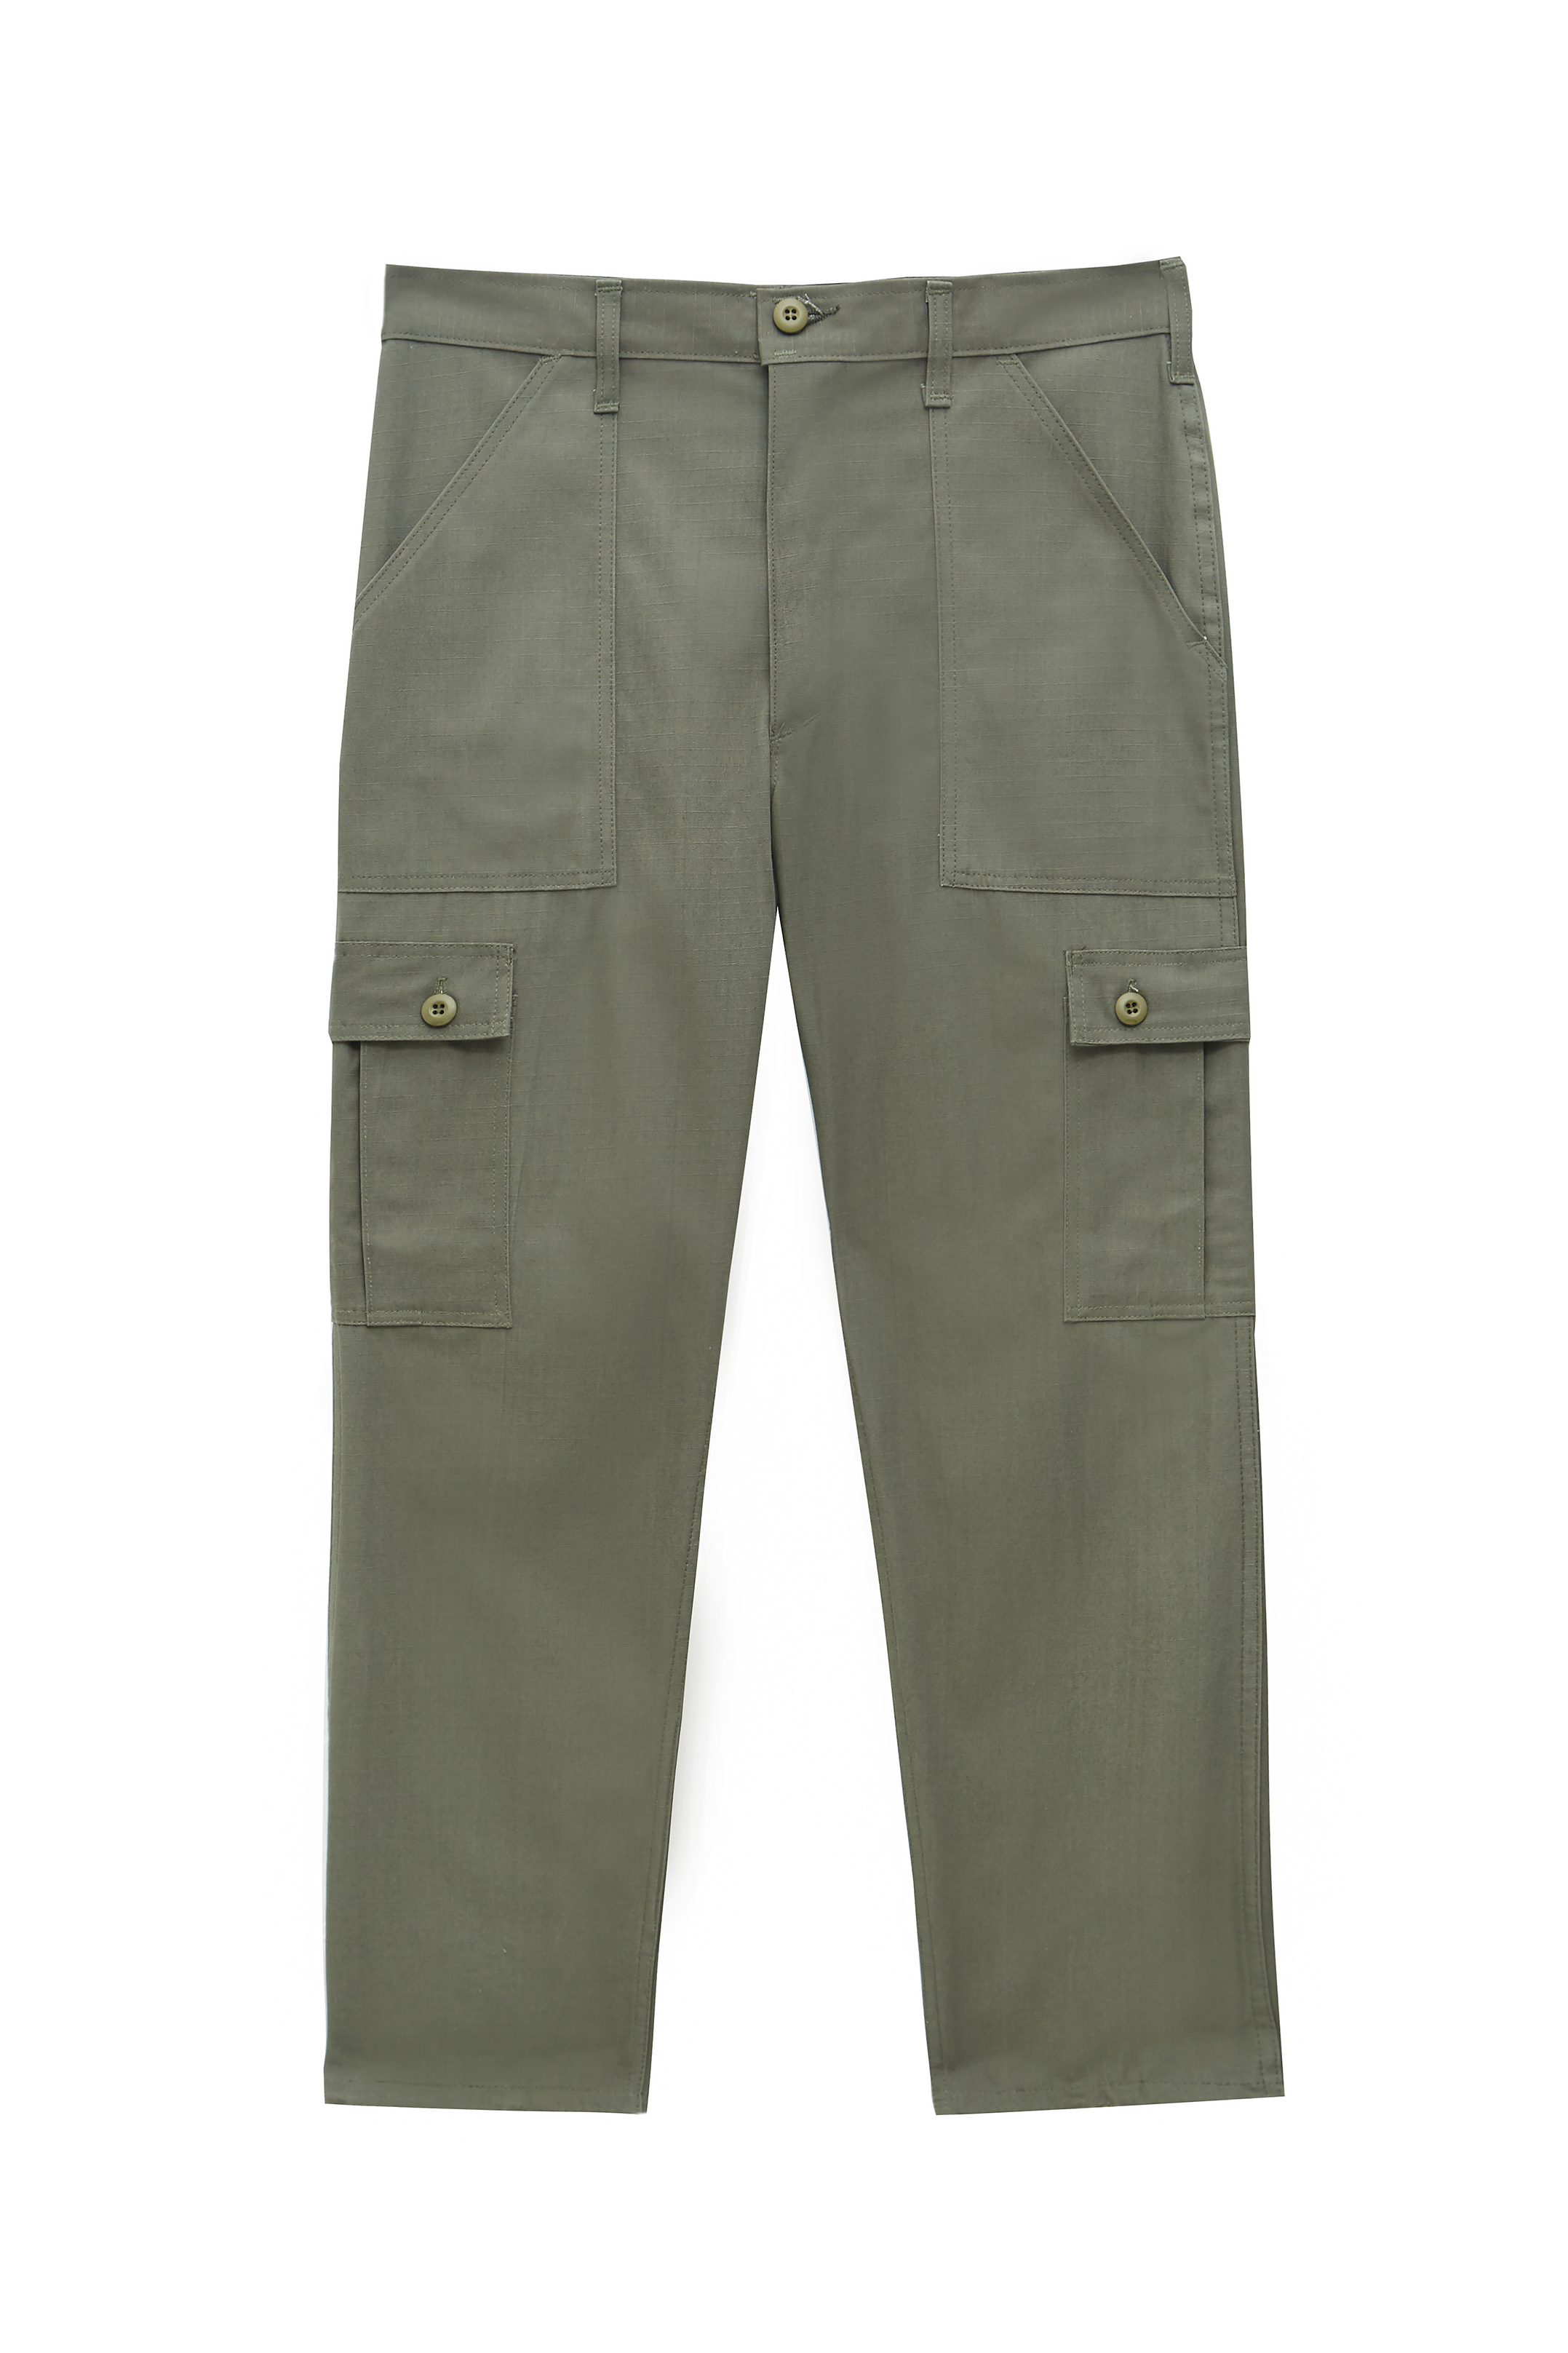 Stan Ray trousers at Urban Outfitters £65 or 90 euros